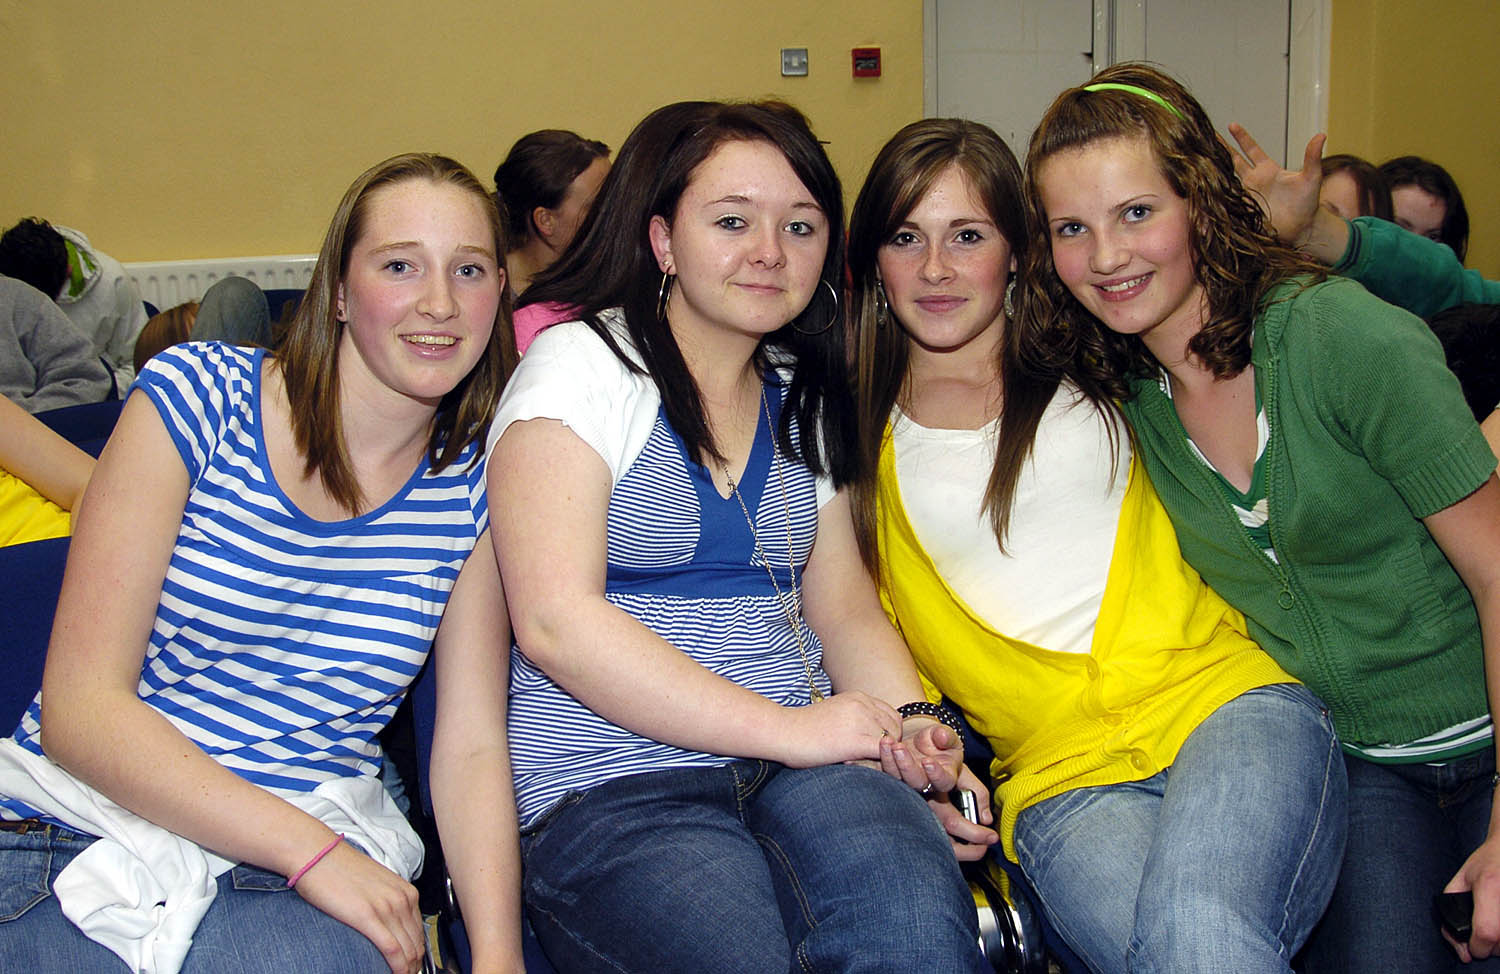 Pictured in the Resource centre in Balla at a Fashion Show organised by Manulla Football Club Youth Council to raise funds for Manulla Football Club. Outfits for the night were supplied by Next Step, Elverys, Adams at Shaws, Beverley Hills and Padraic McHales. A group of young ladies enjoying the show L-R: Niamh Barrett, Sinead Dempsey, Grace Clarke, Rachel Gibbons. Photo  Ken Wright Photography 2007